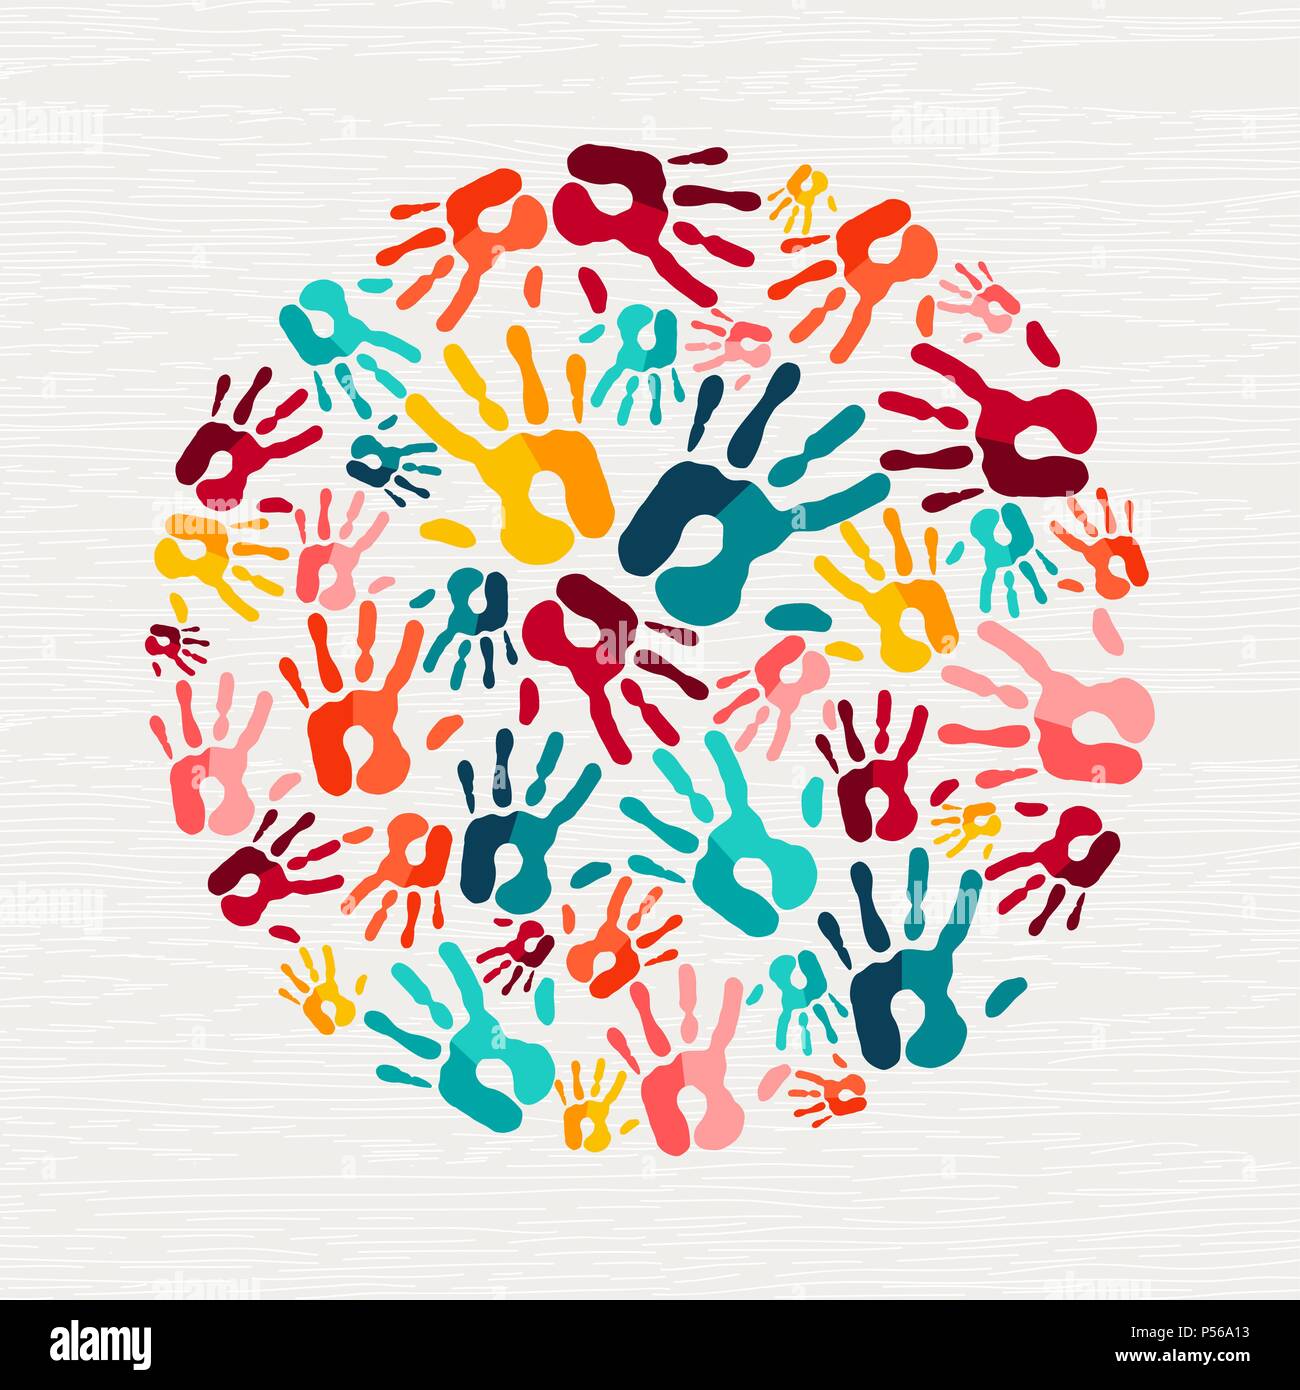 Human hand print shape concept. Colorful paint handprint background for diverse community or social project. EPS10 vector. Stock Vector